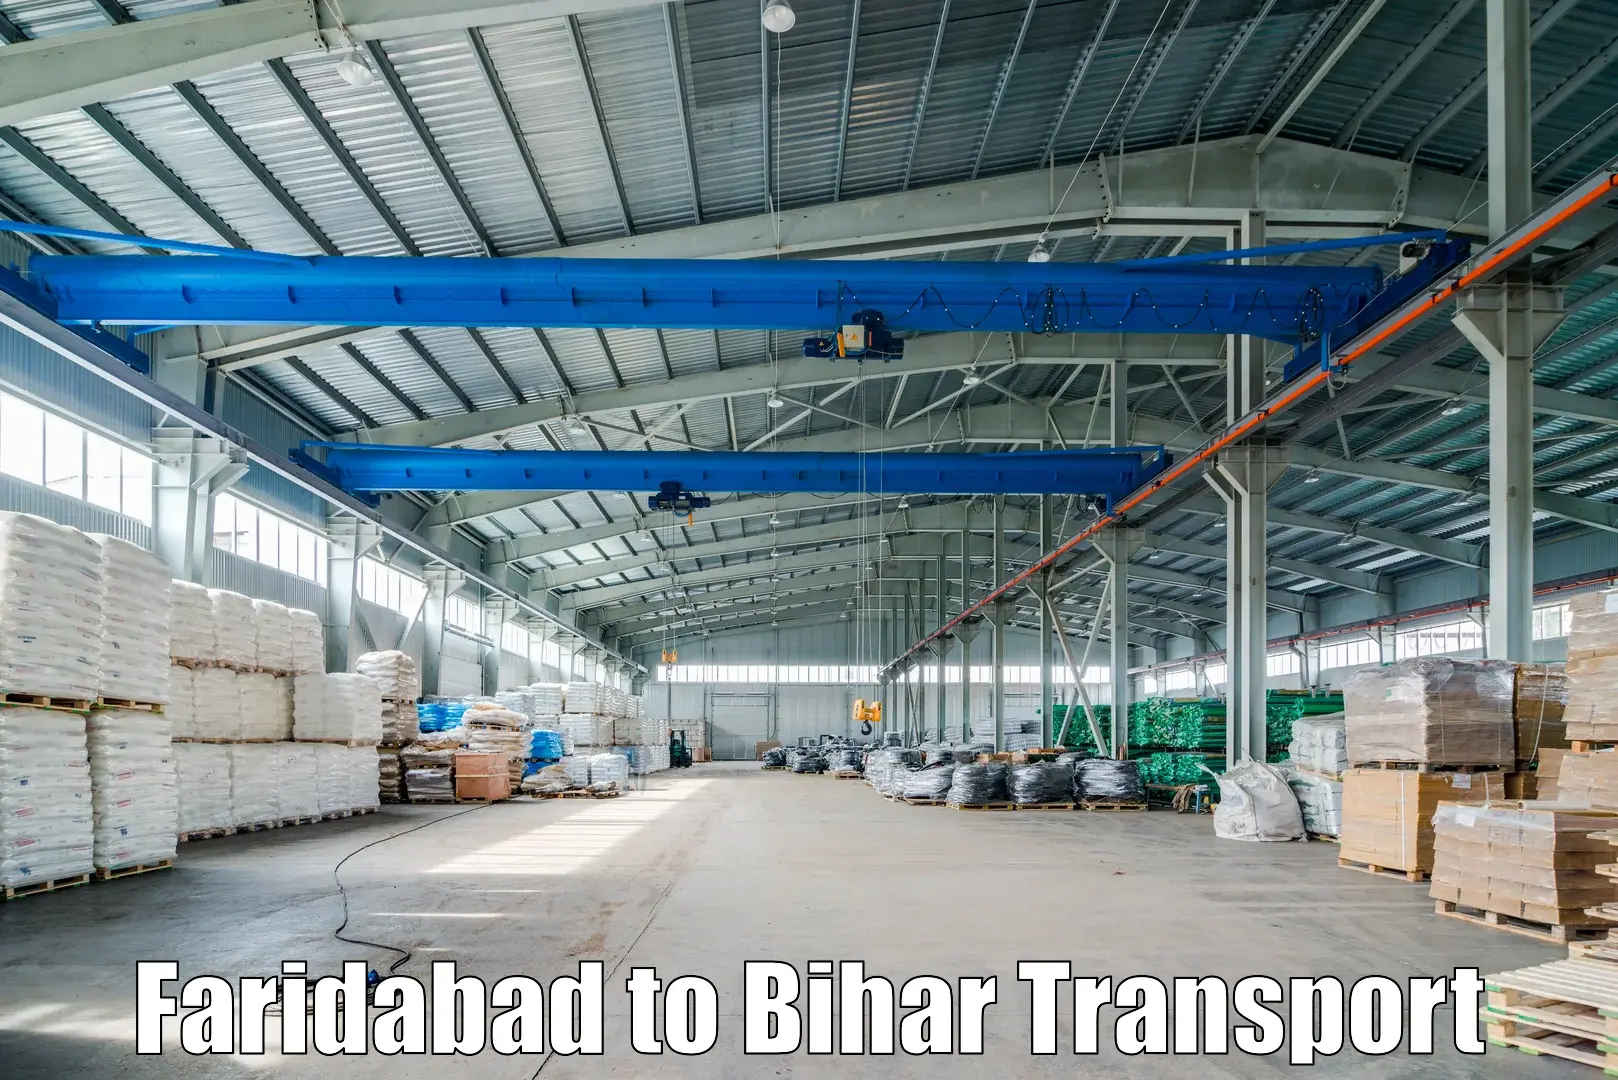 Air cargo transport services in Faridabad to Bhorey